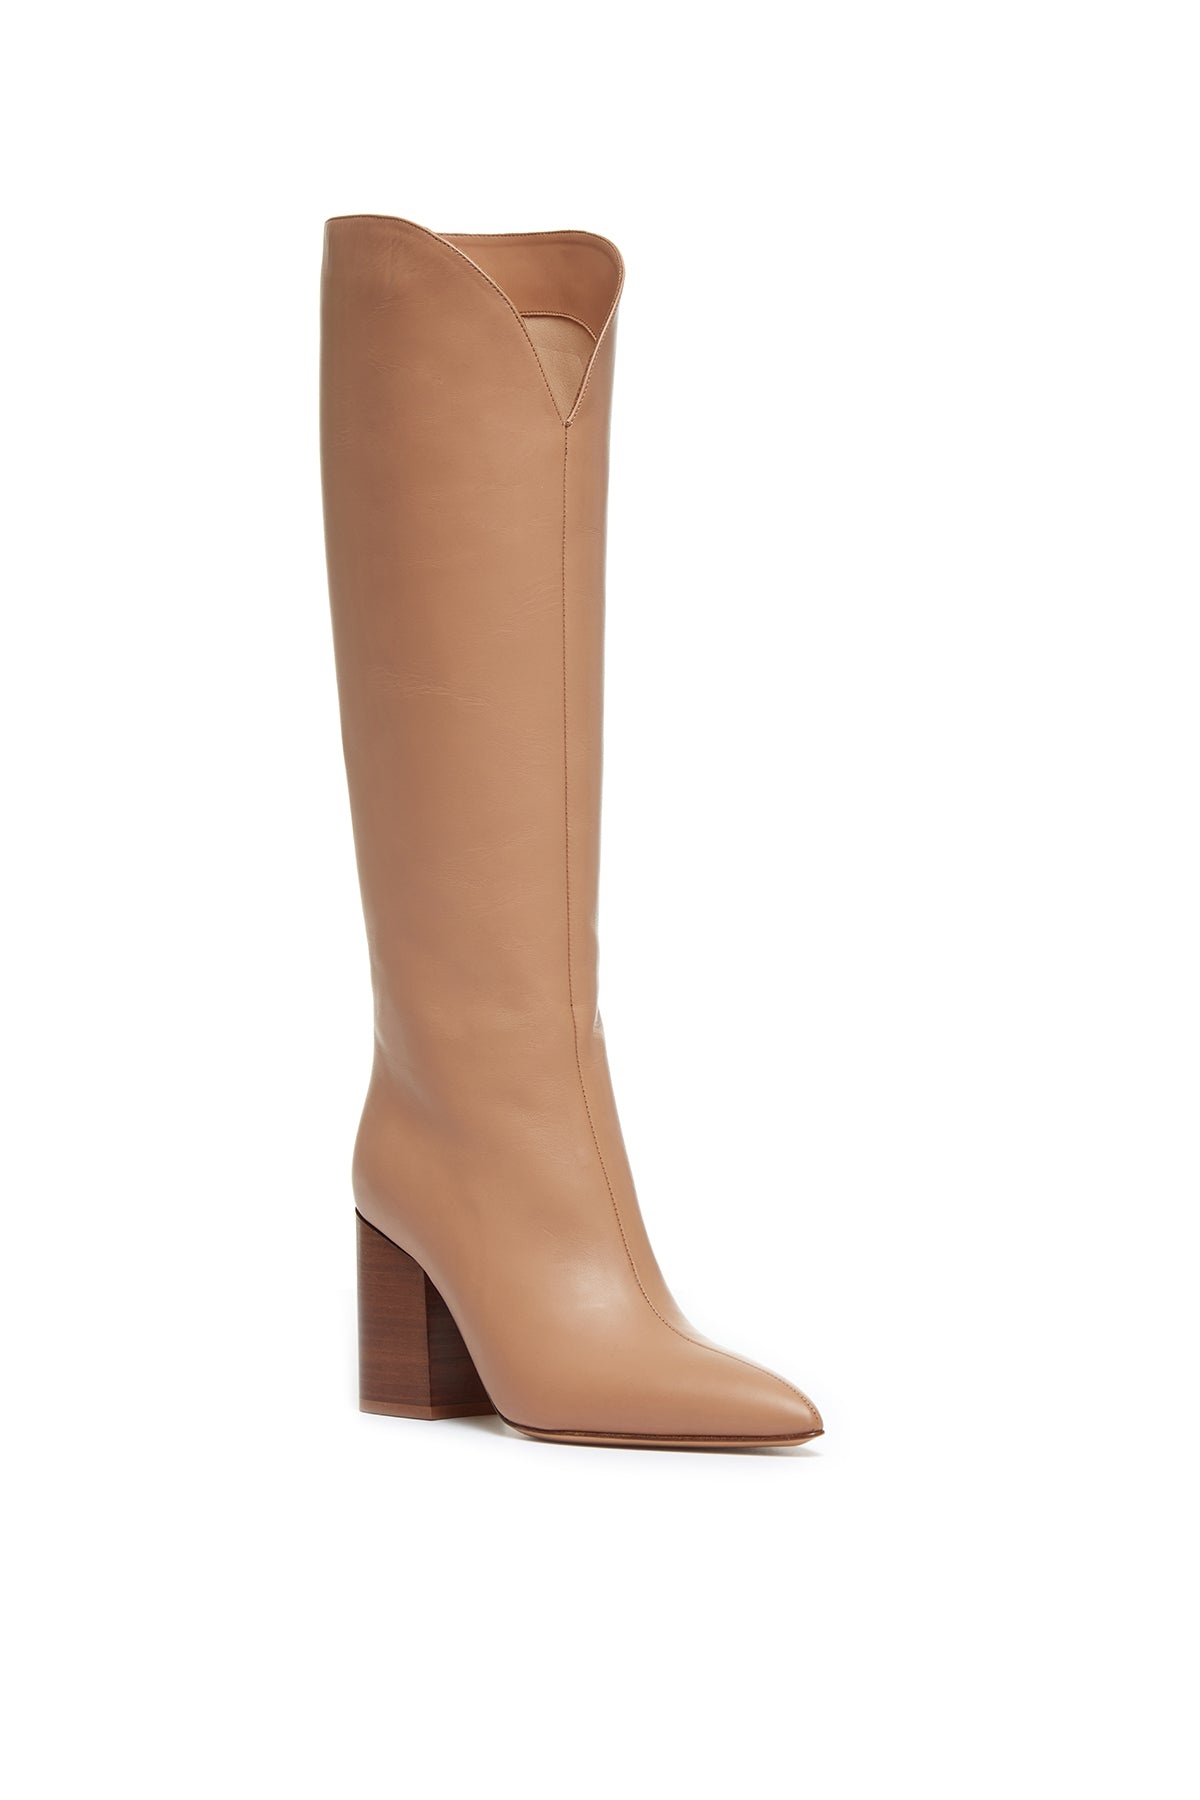 Cora Knee High Boot in Camel Leather - 2